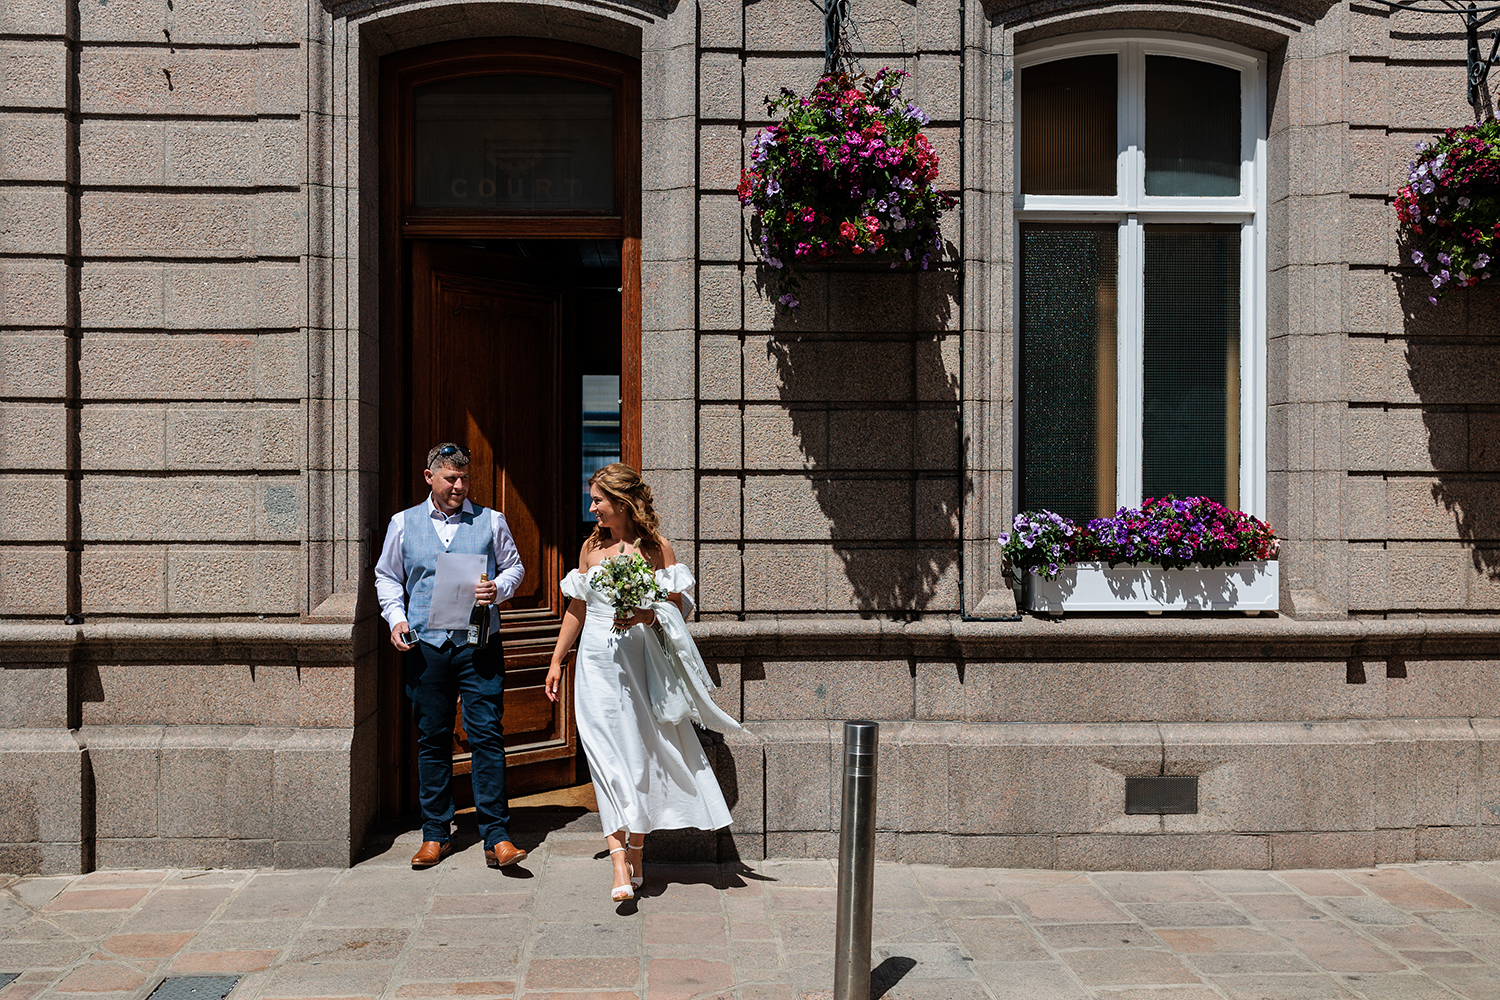 The newlyweds leave The Old Magistrates Court, St Helier, Jersey after their elopement Wedding